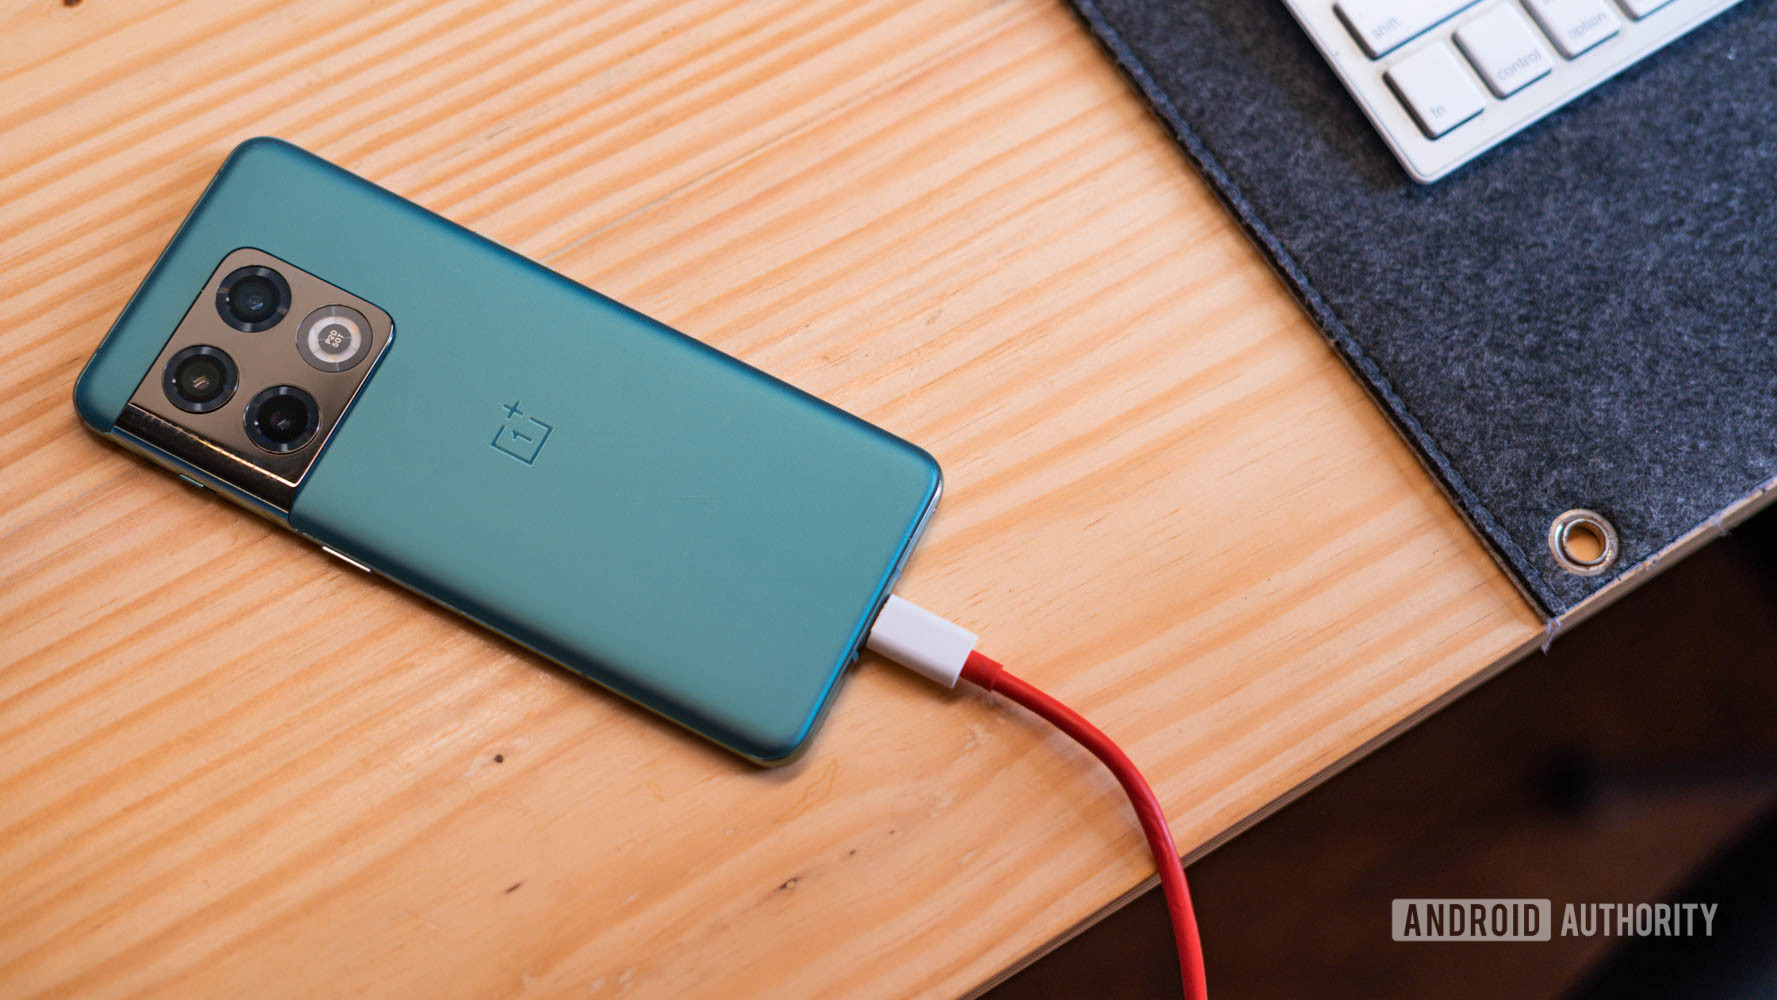 Poll: How long does it take to fully charge your phone?